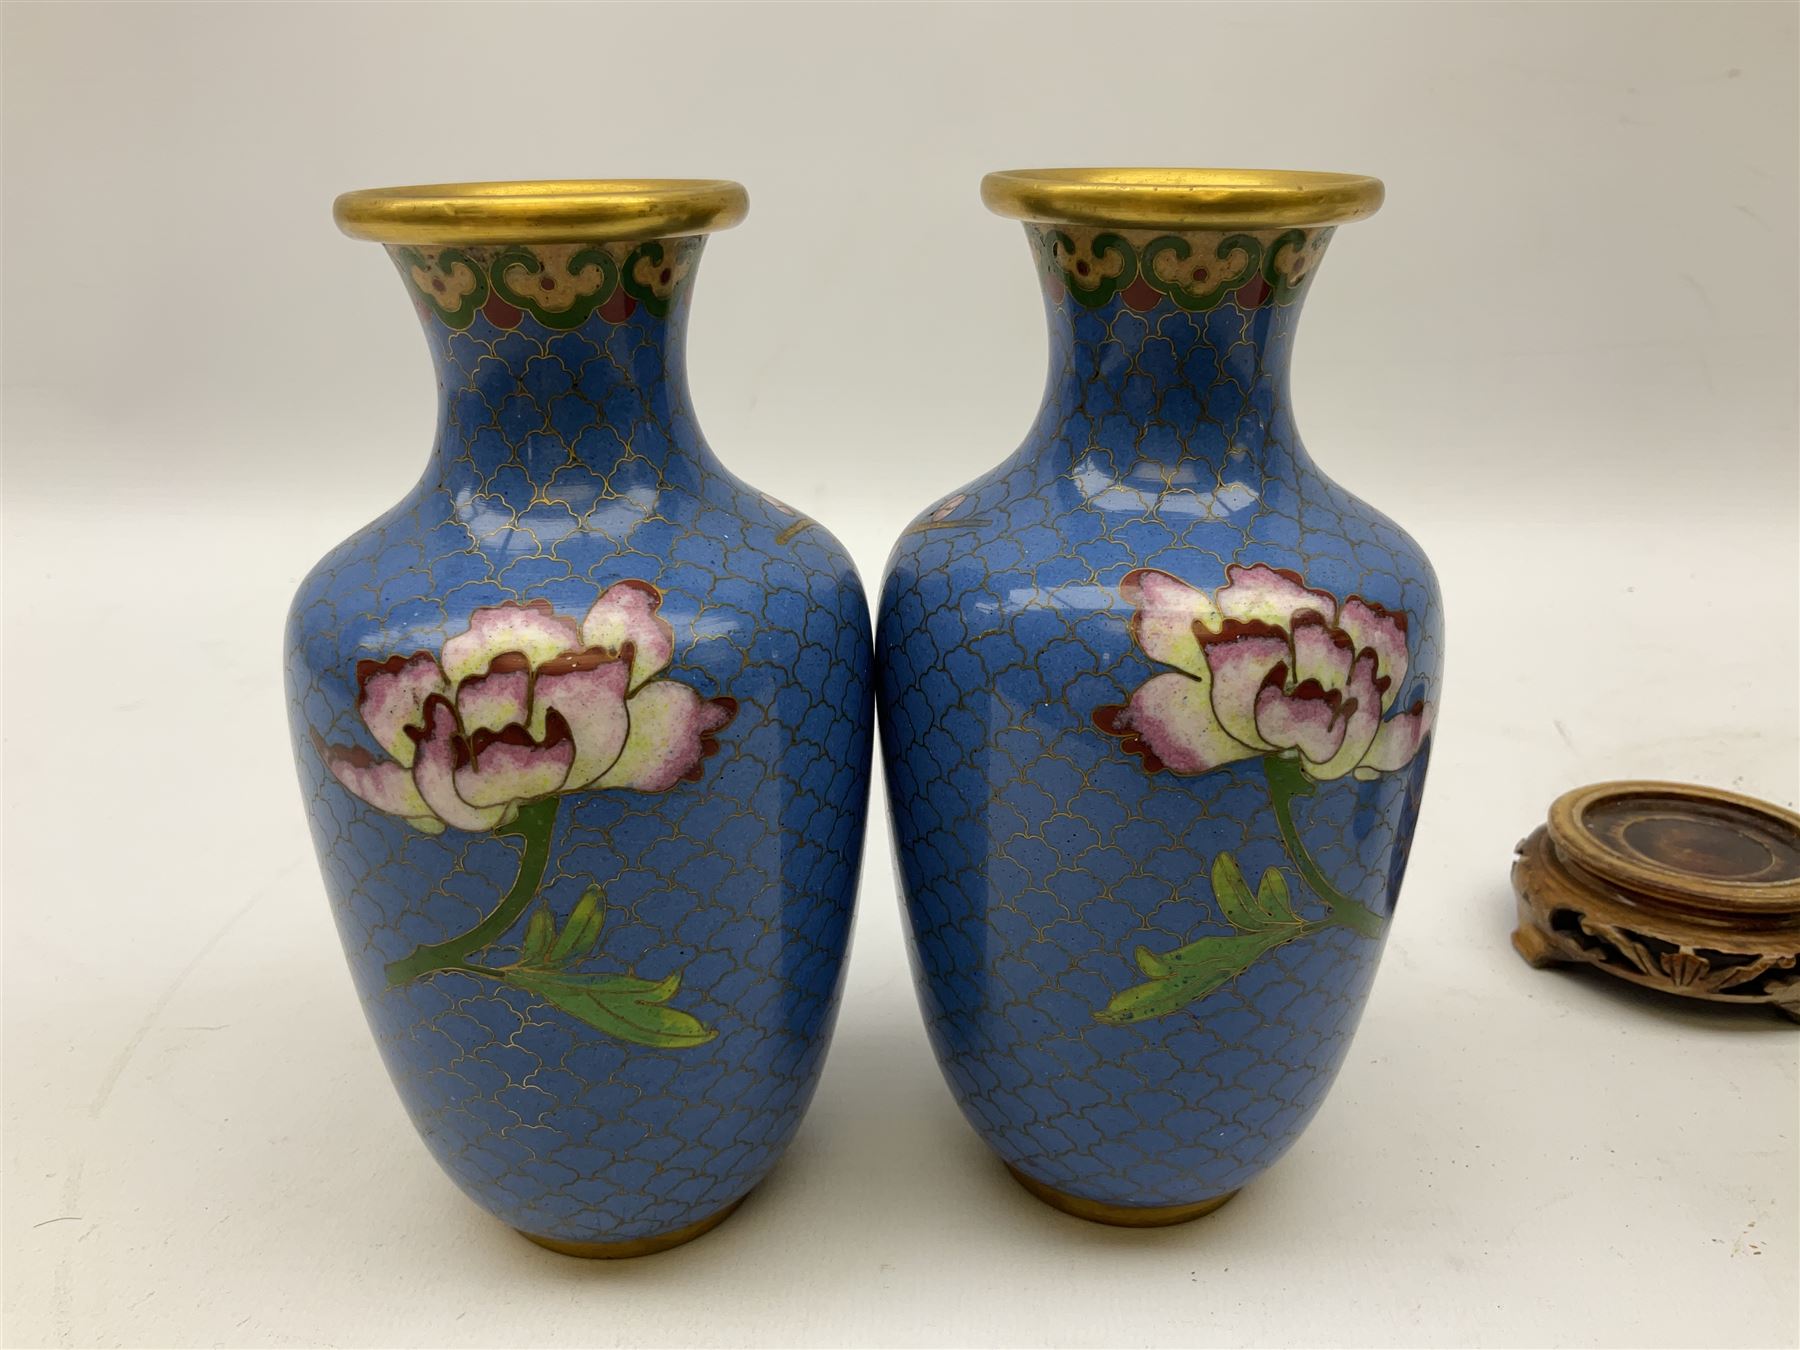 Pair of Chinese cloisonne vases on wooden stands - Image 4 of 7